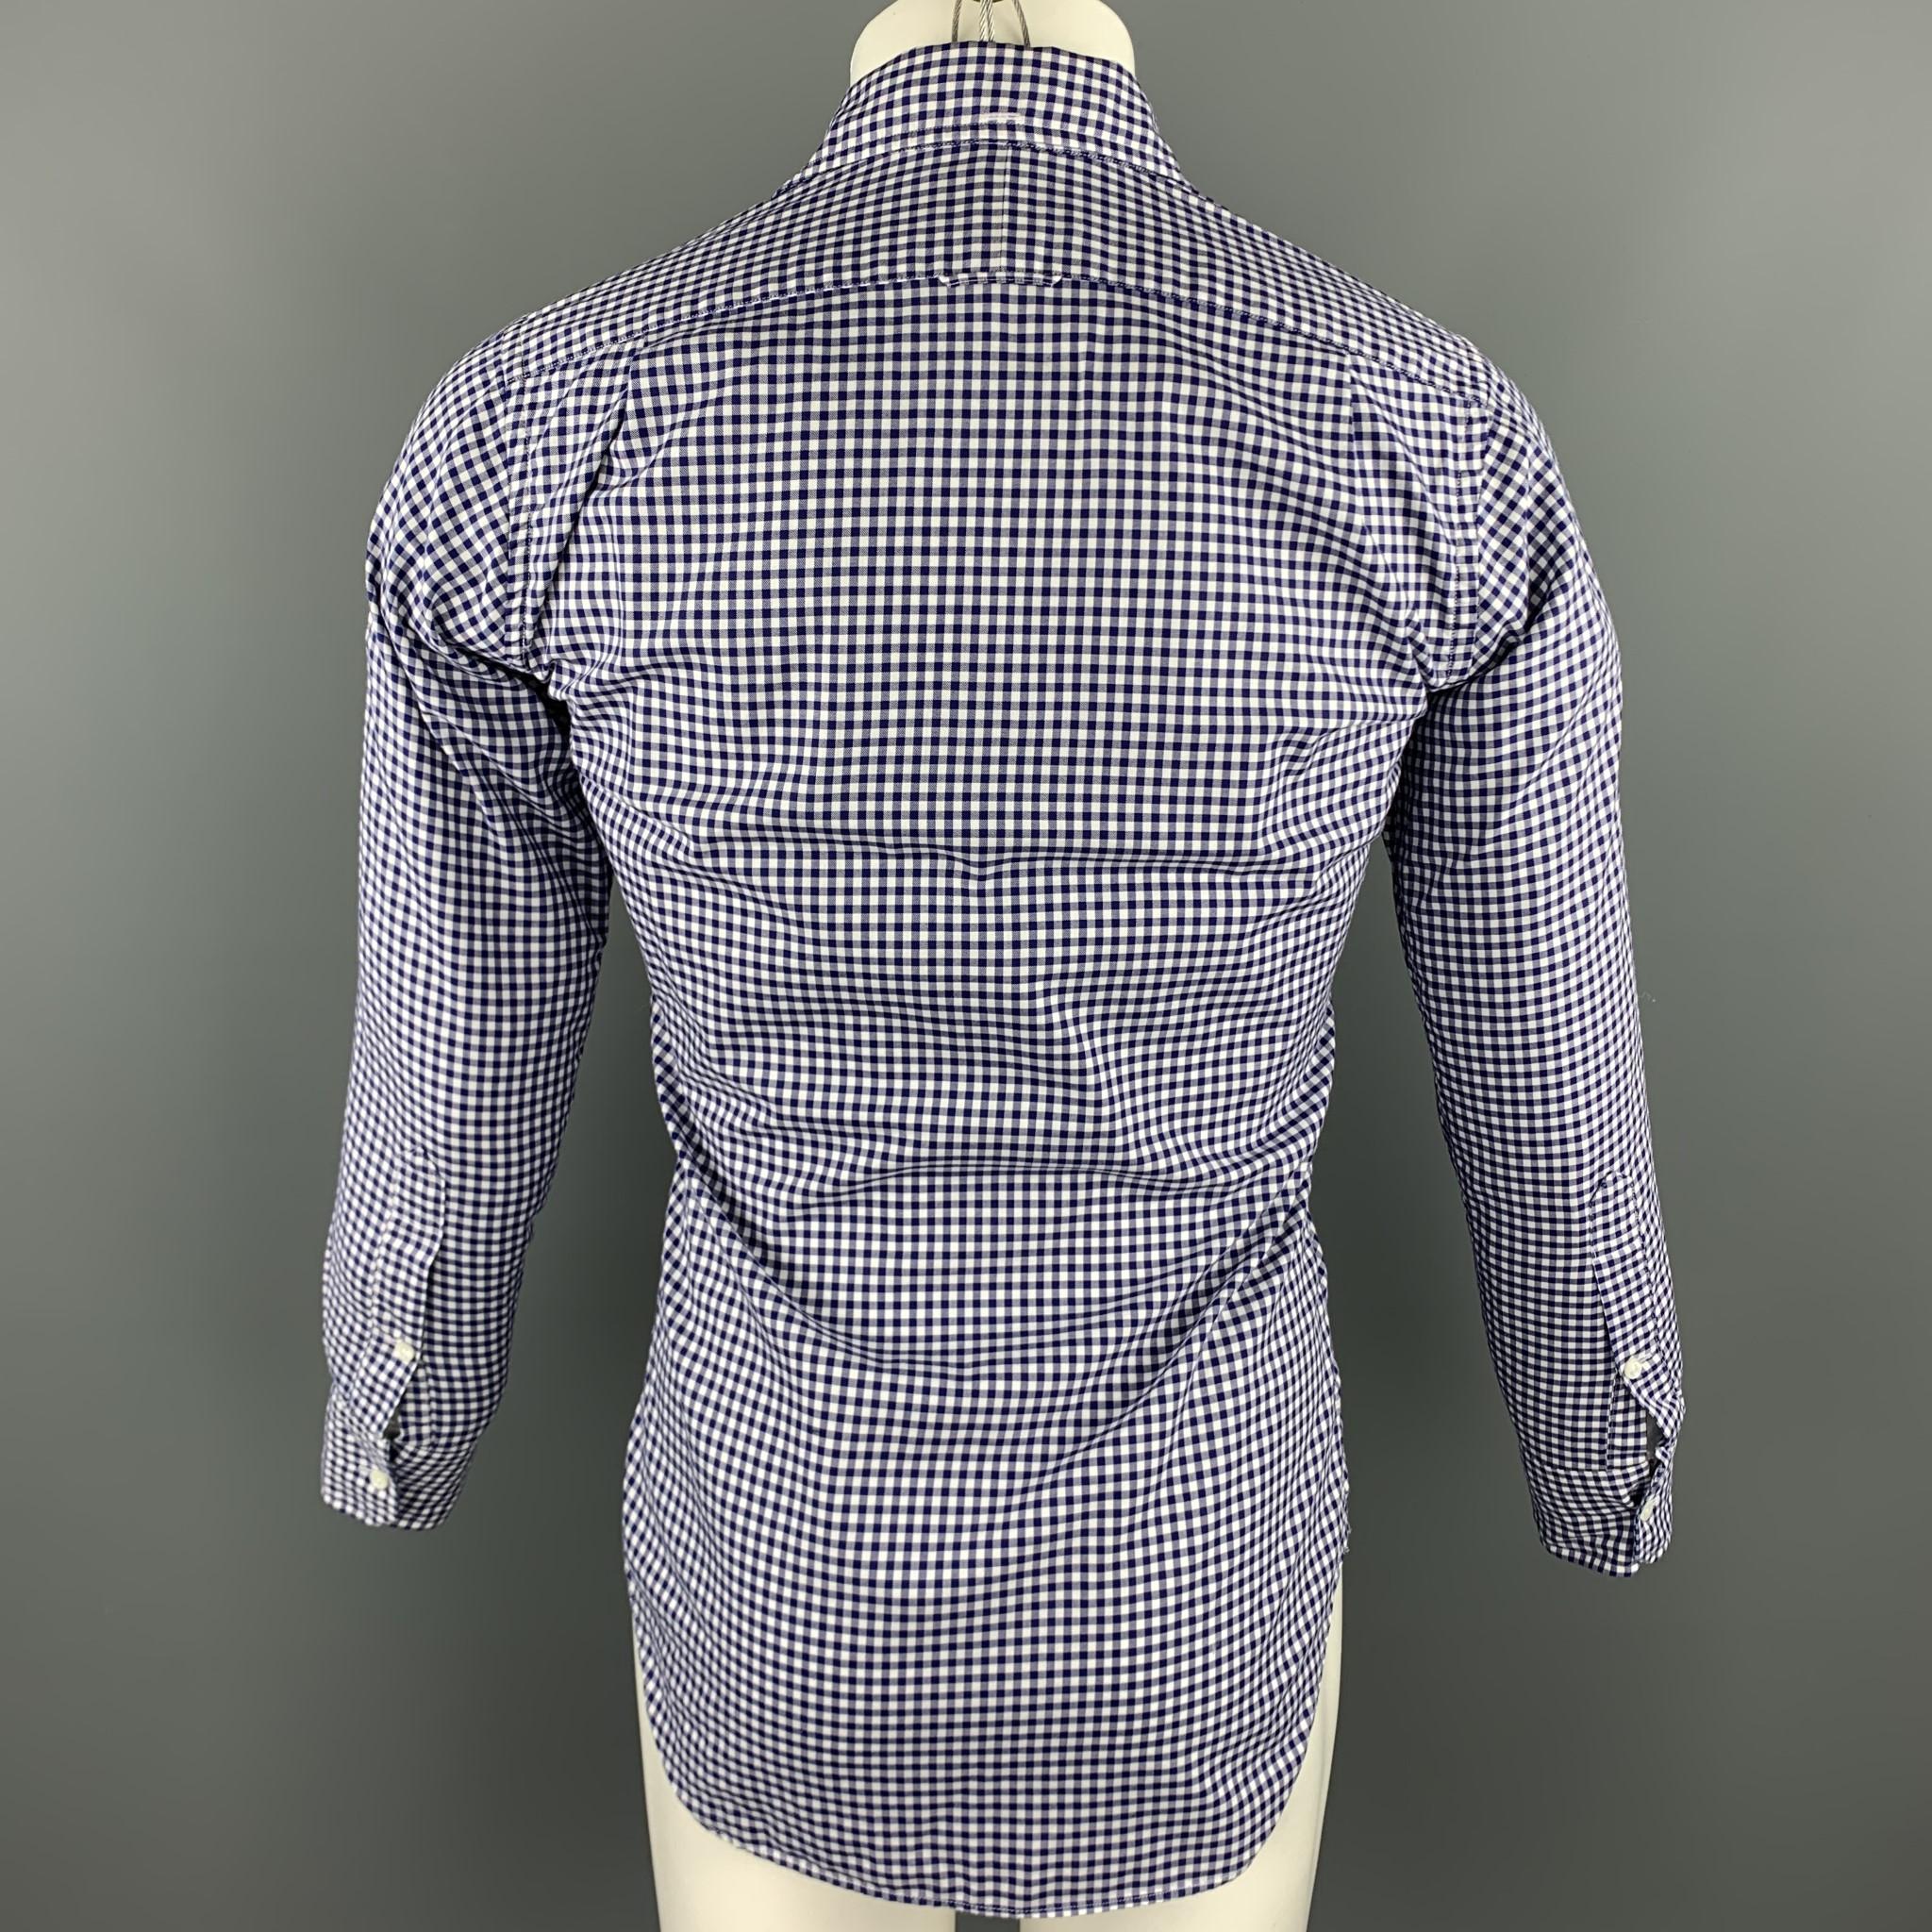 Men's THOM BROWNE Size S / 1 White & Blue Gingham Cotton Long Sleeve Shirt